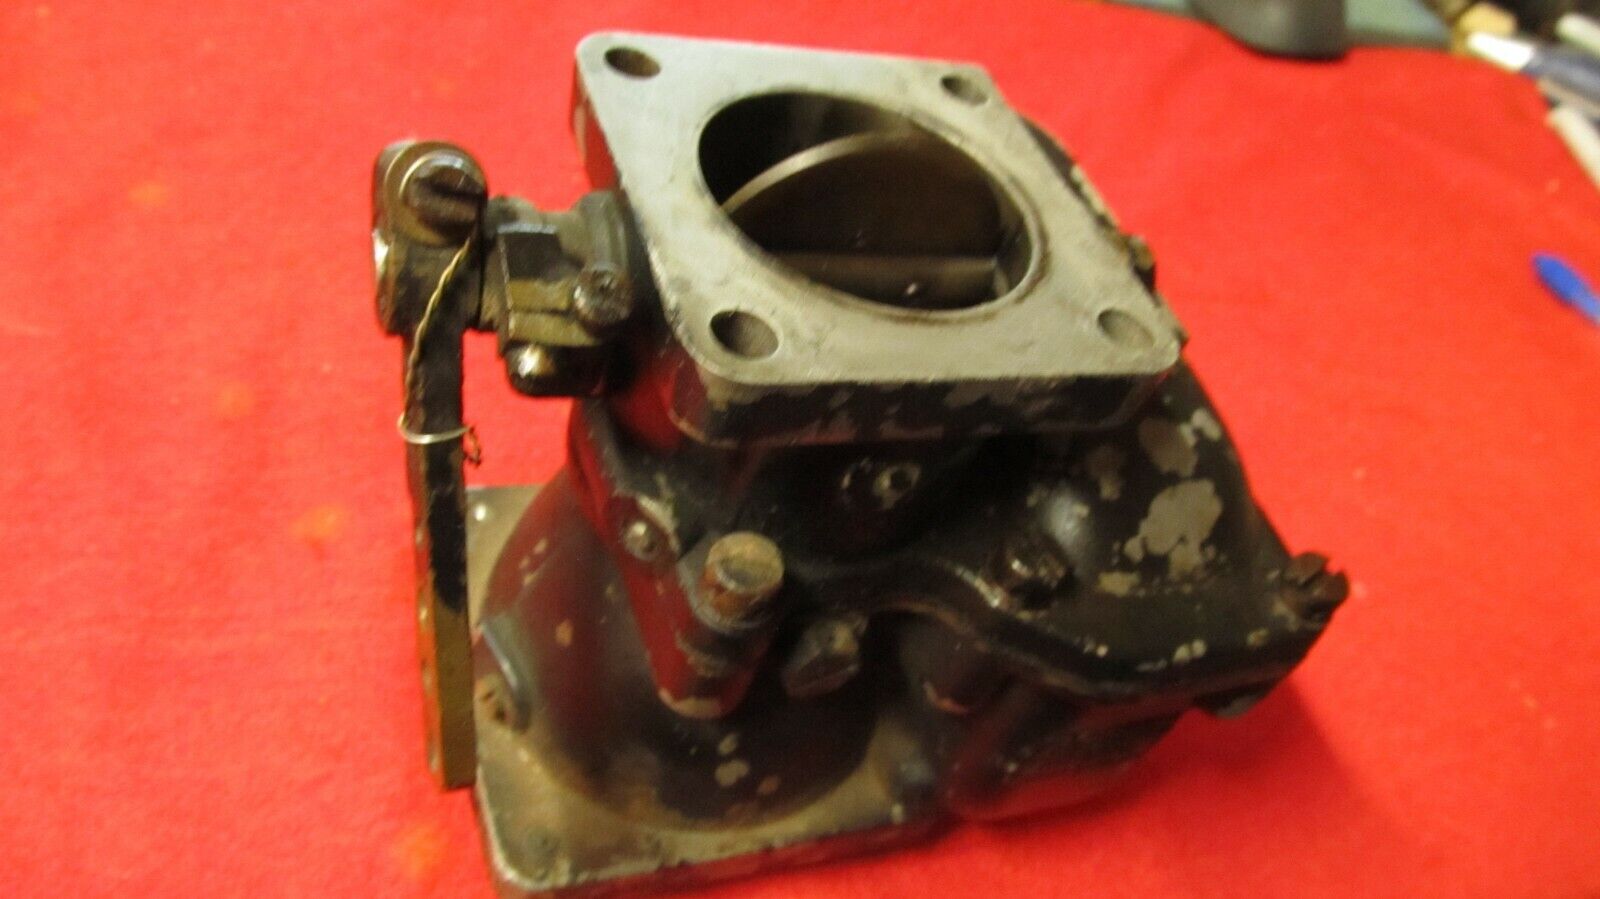 Stromberg Carburetor MA-S3B Appears complete sold as core.